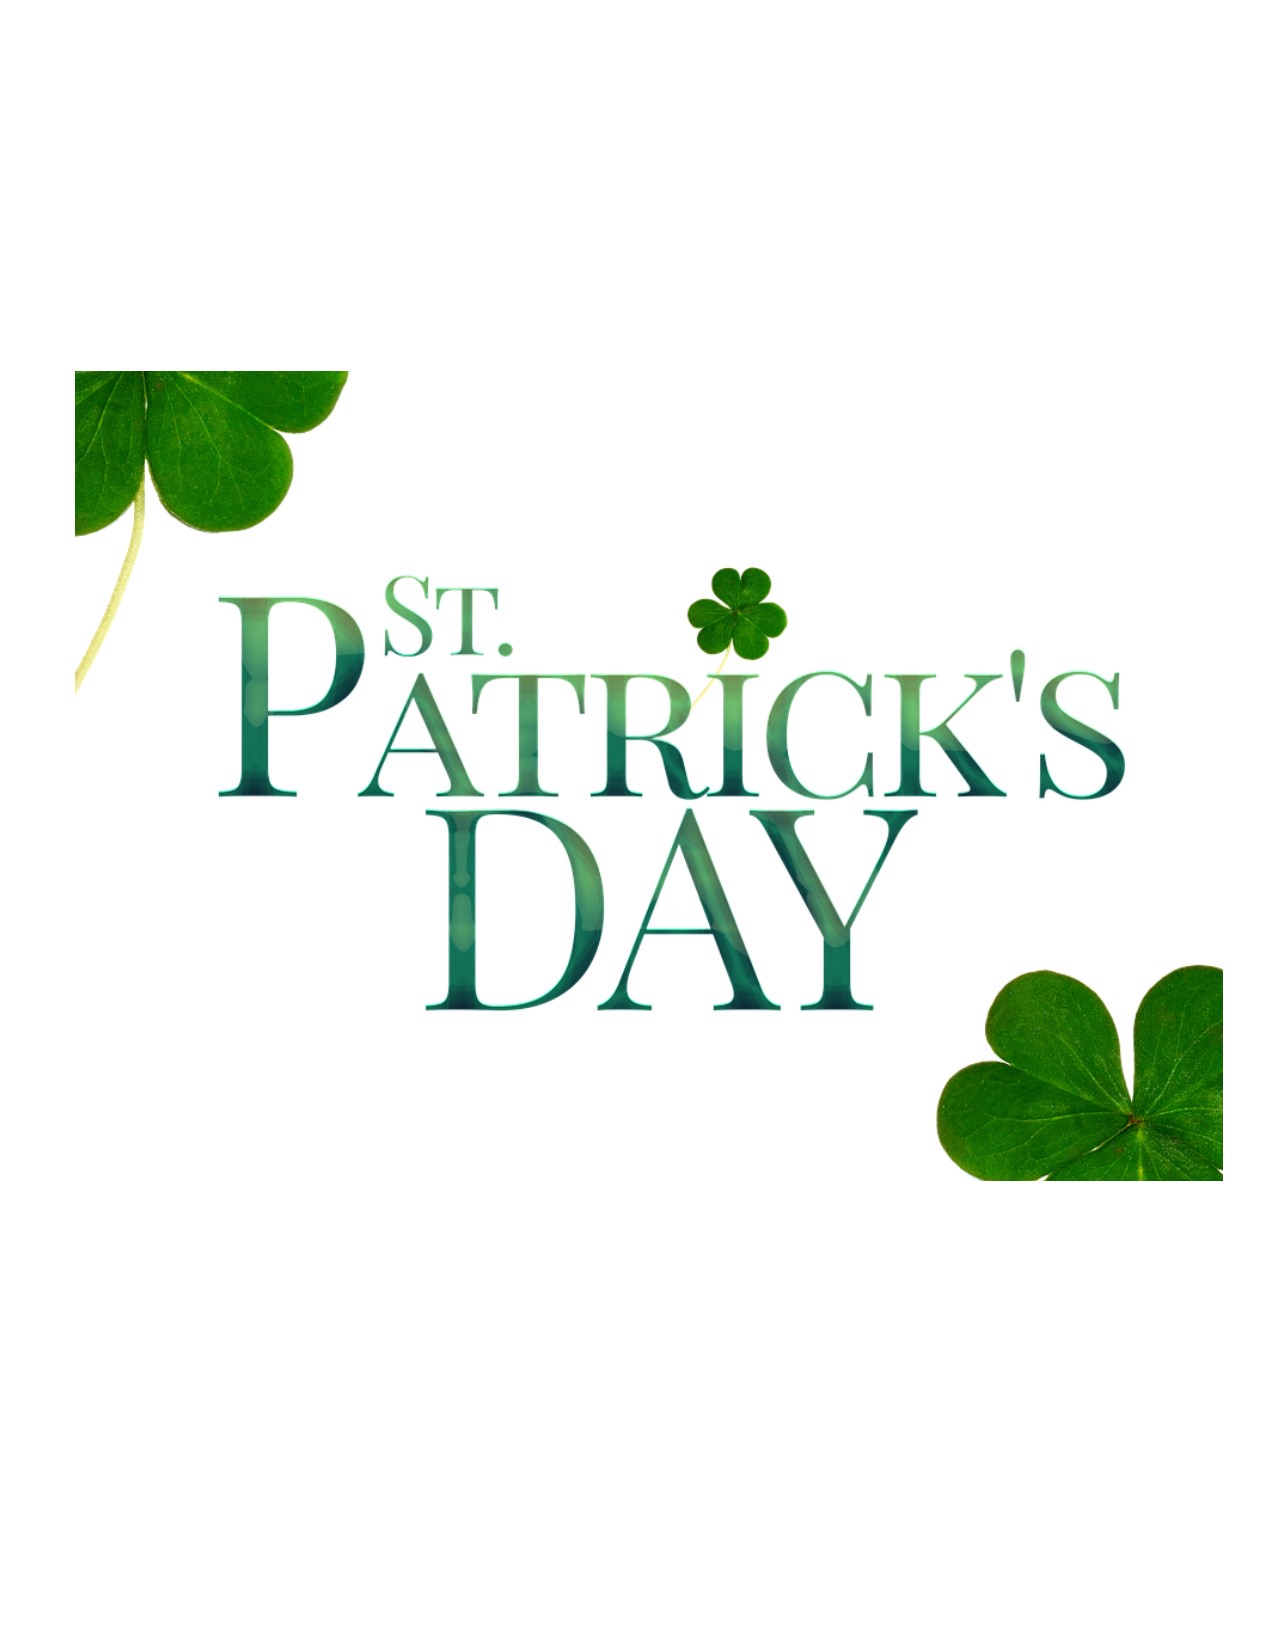 white background, green text spelling St Patrick's Day